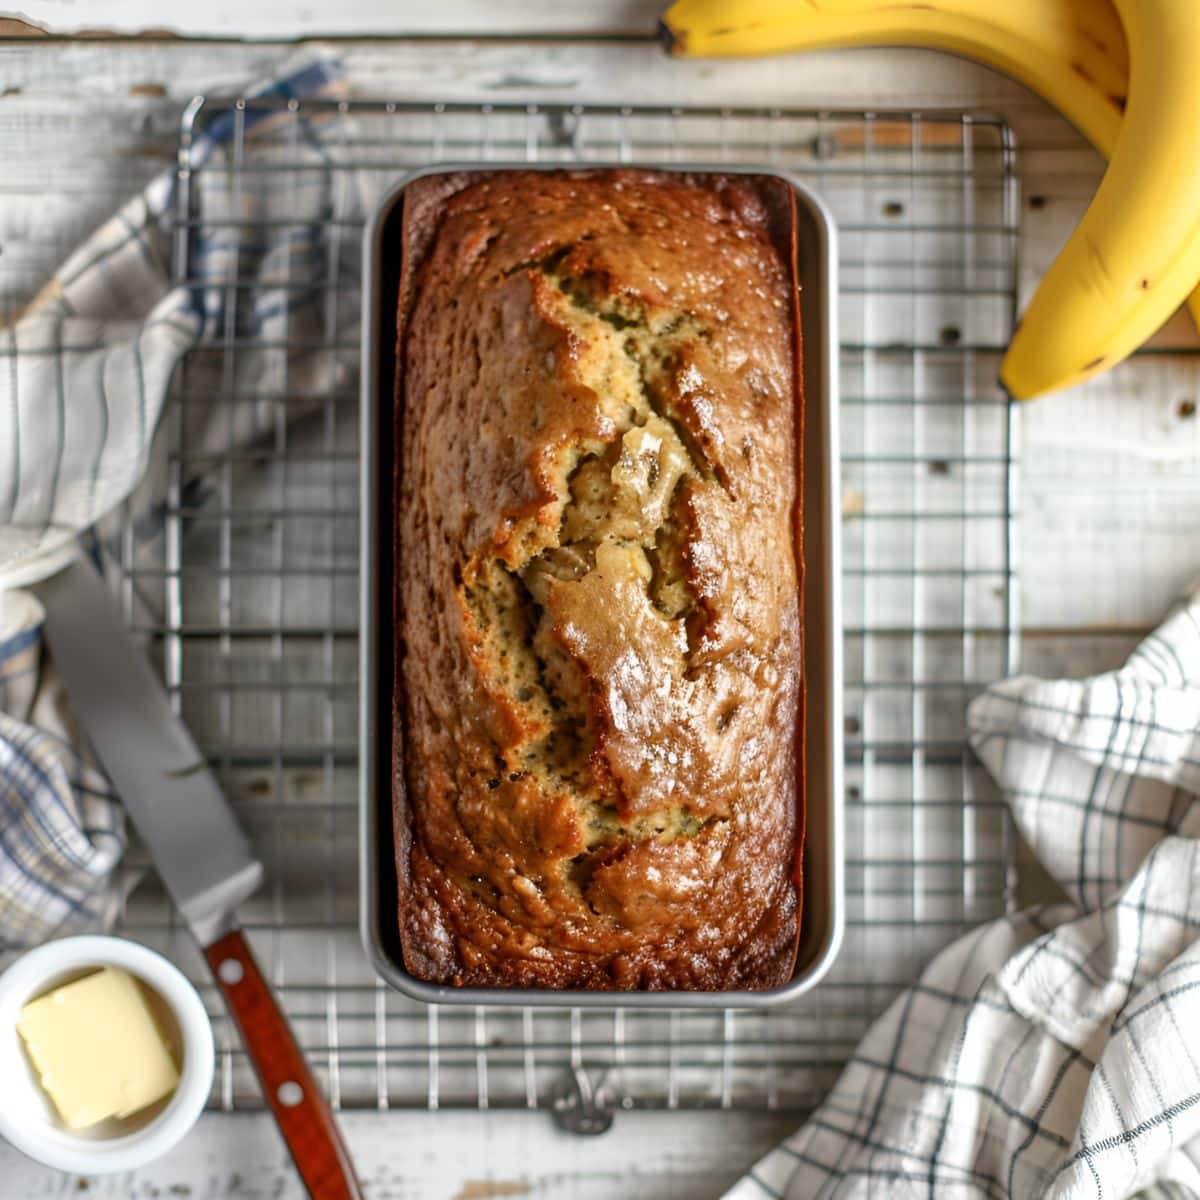 Top View of a Loaf of Freshly Baked Paula Deen Banana Bread in a Loaf Tin, Cooling on a Wire Rack with Fresh Bananas, Ramekin of Butter, a Knife, and a Kitchen Towel to the Side